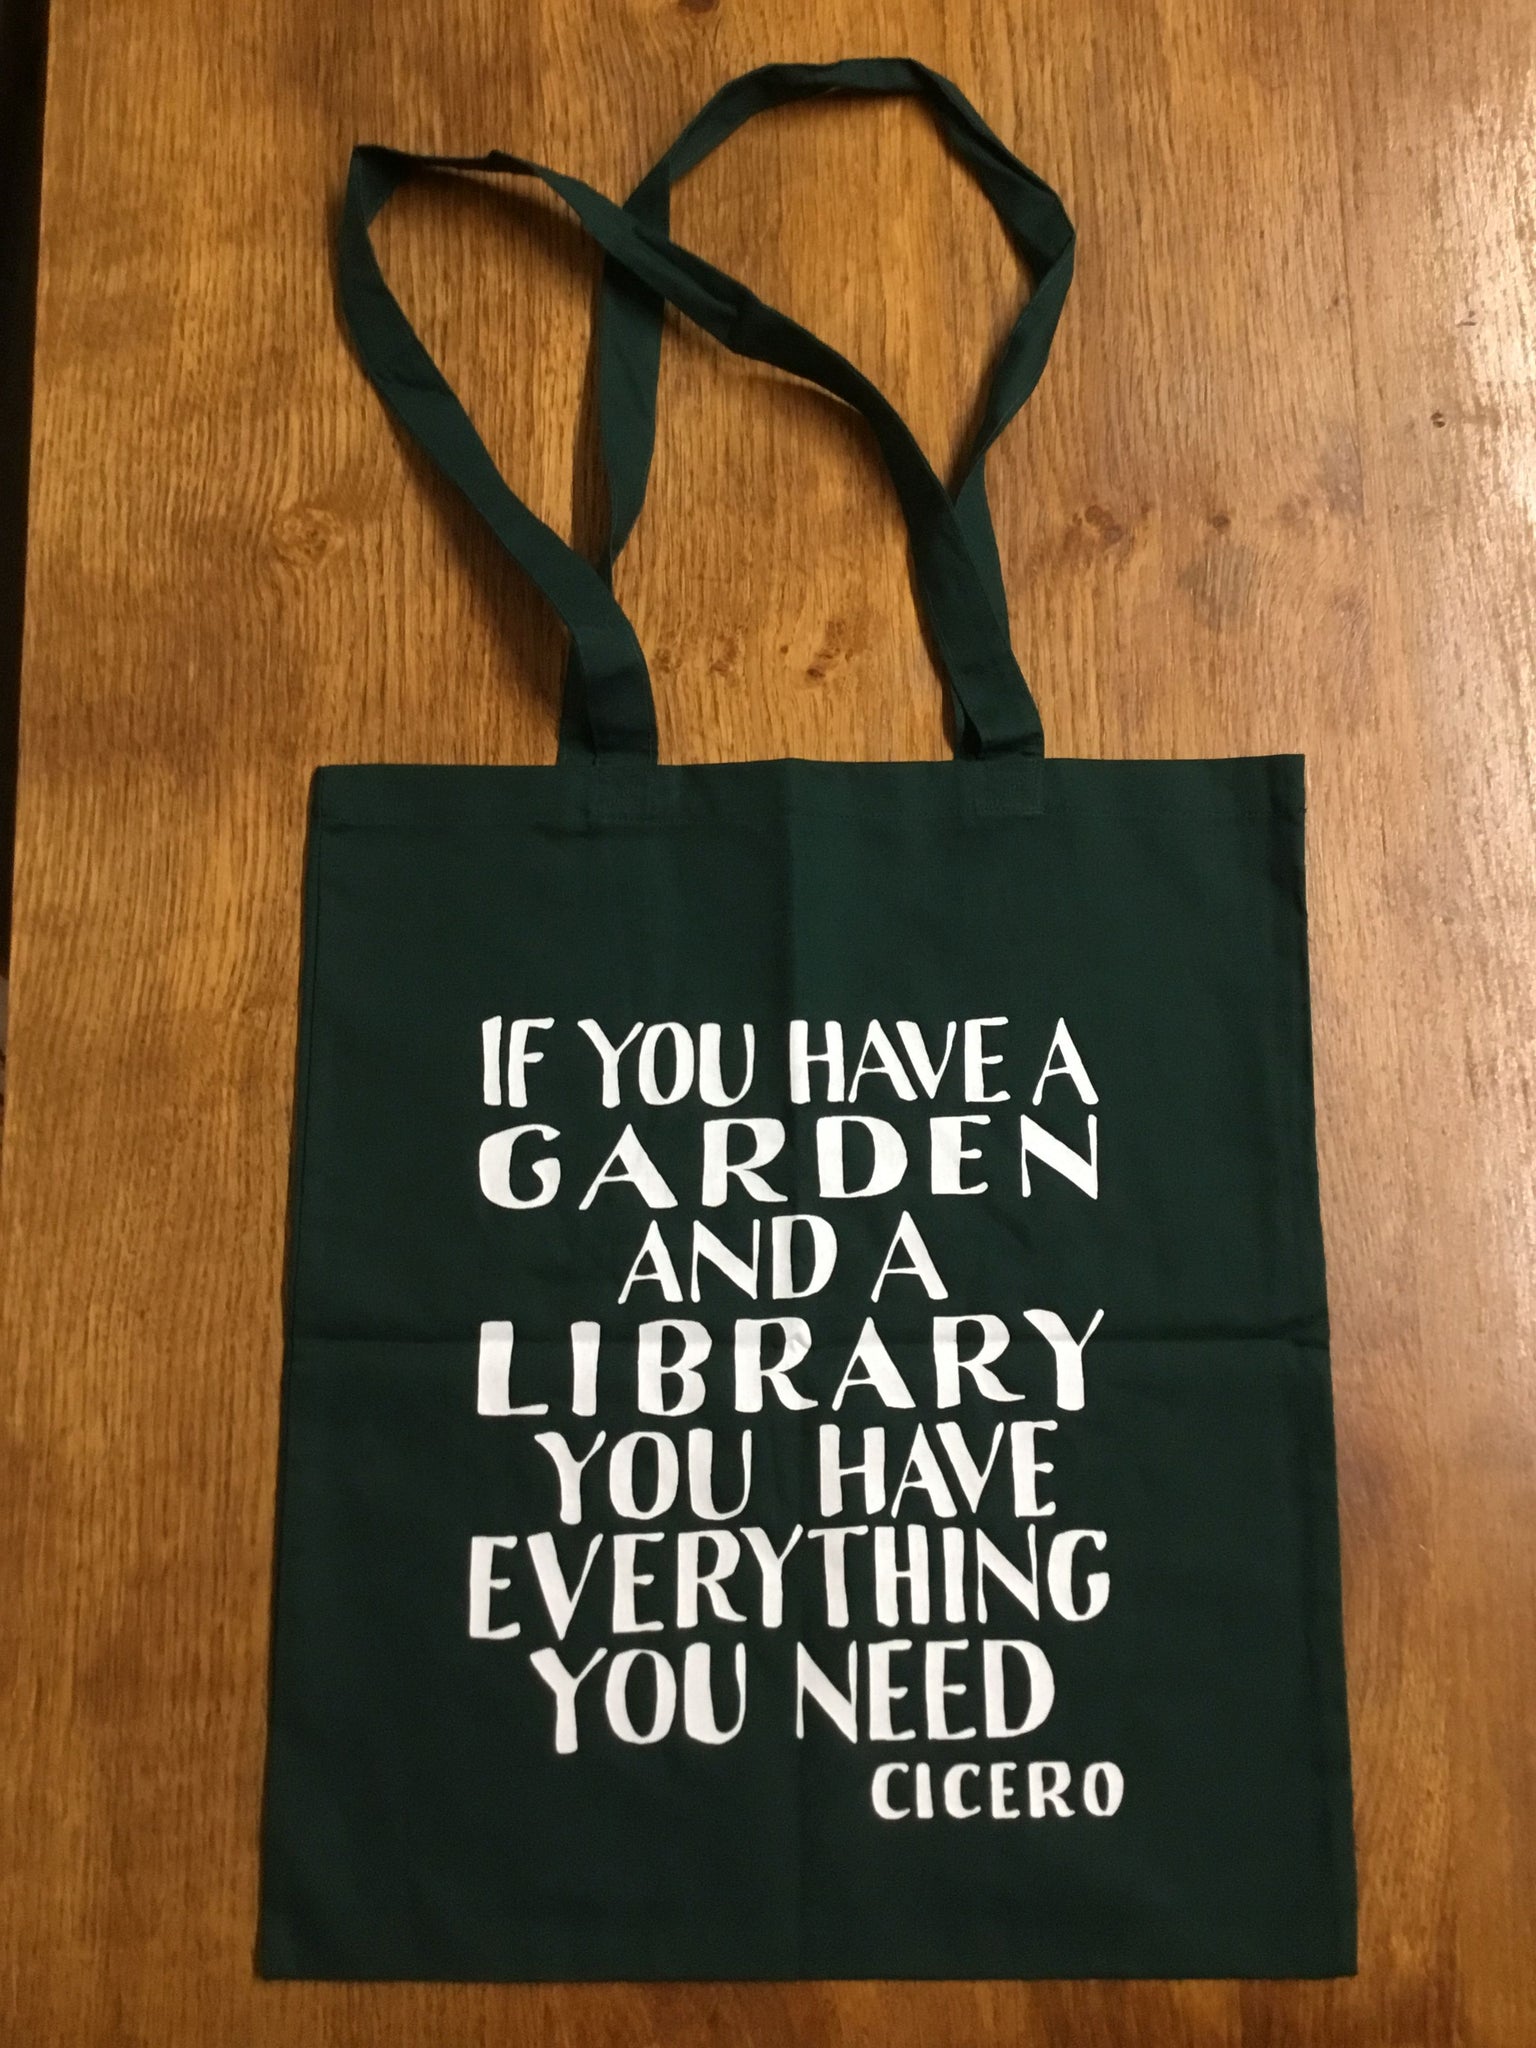 'If you have a garden and a Library you have everything you need' by Cicero - Cotton Bag